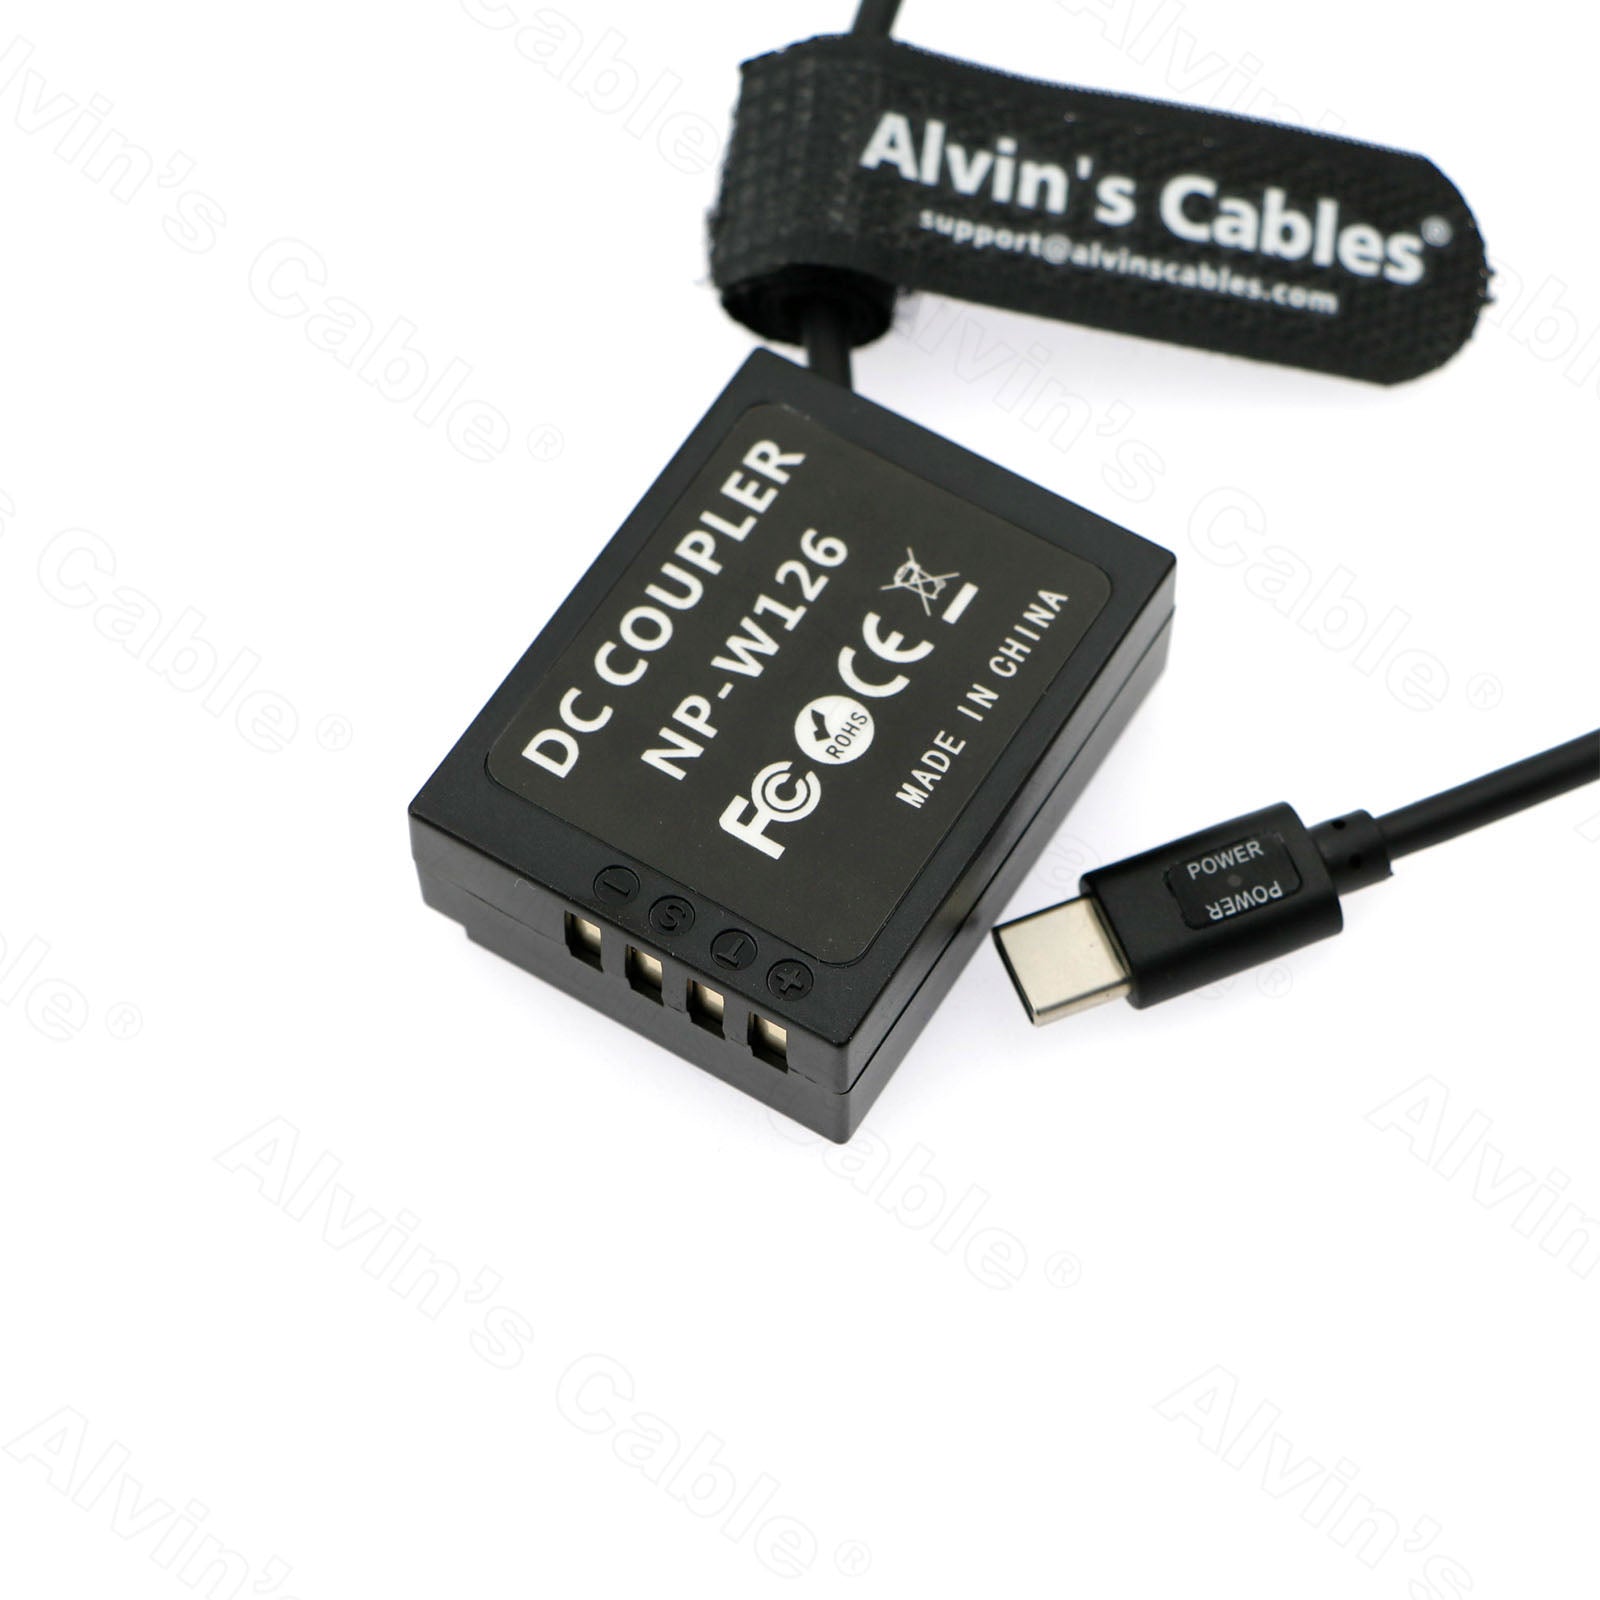 Alvin's Cables PD Type-C to Decoding NP-W126 Dummy Battery Coiled Power Cable for Fujifilm Fuji XT1 X-T10 XT2 X-T20 XT3 XT30 X-Pro2 X-Pro3 X-S10 X-E1 X-E2 X-E3 X-M1 X-A1 X-A2 HS50EXR HS35EXR Cameras